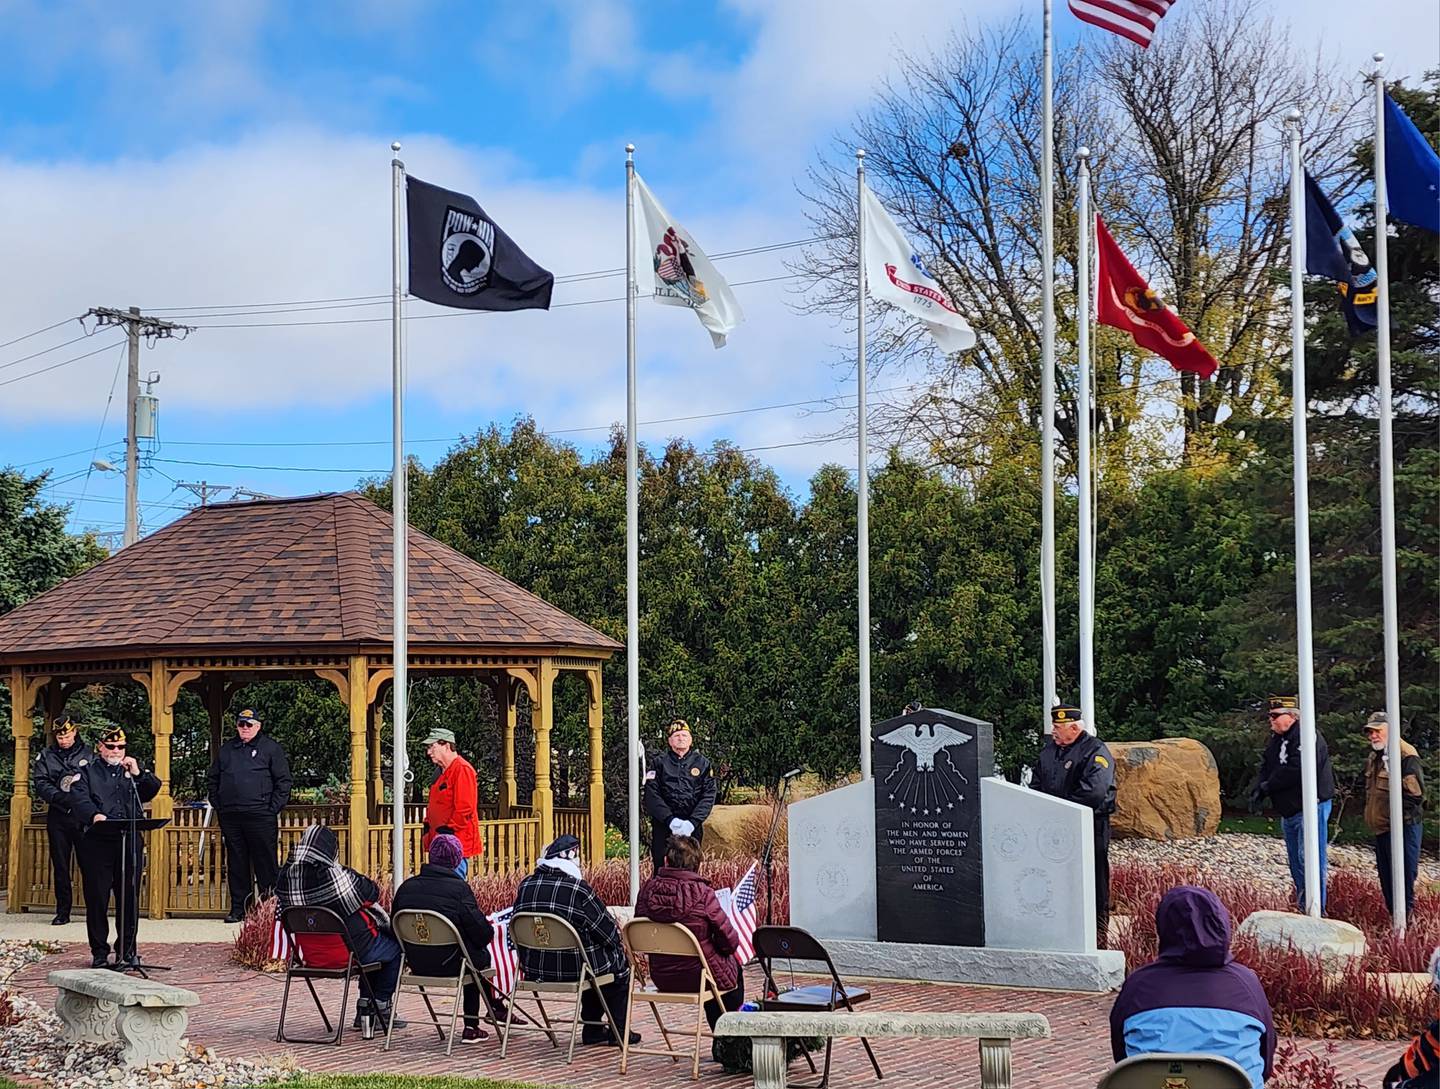 The event began with an invocation, followed by a ceremonial raising of the flags at the newly designed Veterans Park in Princeton, across from City Hall.